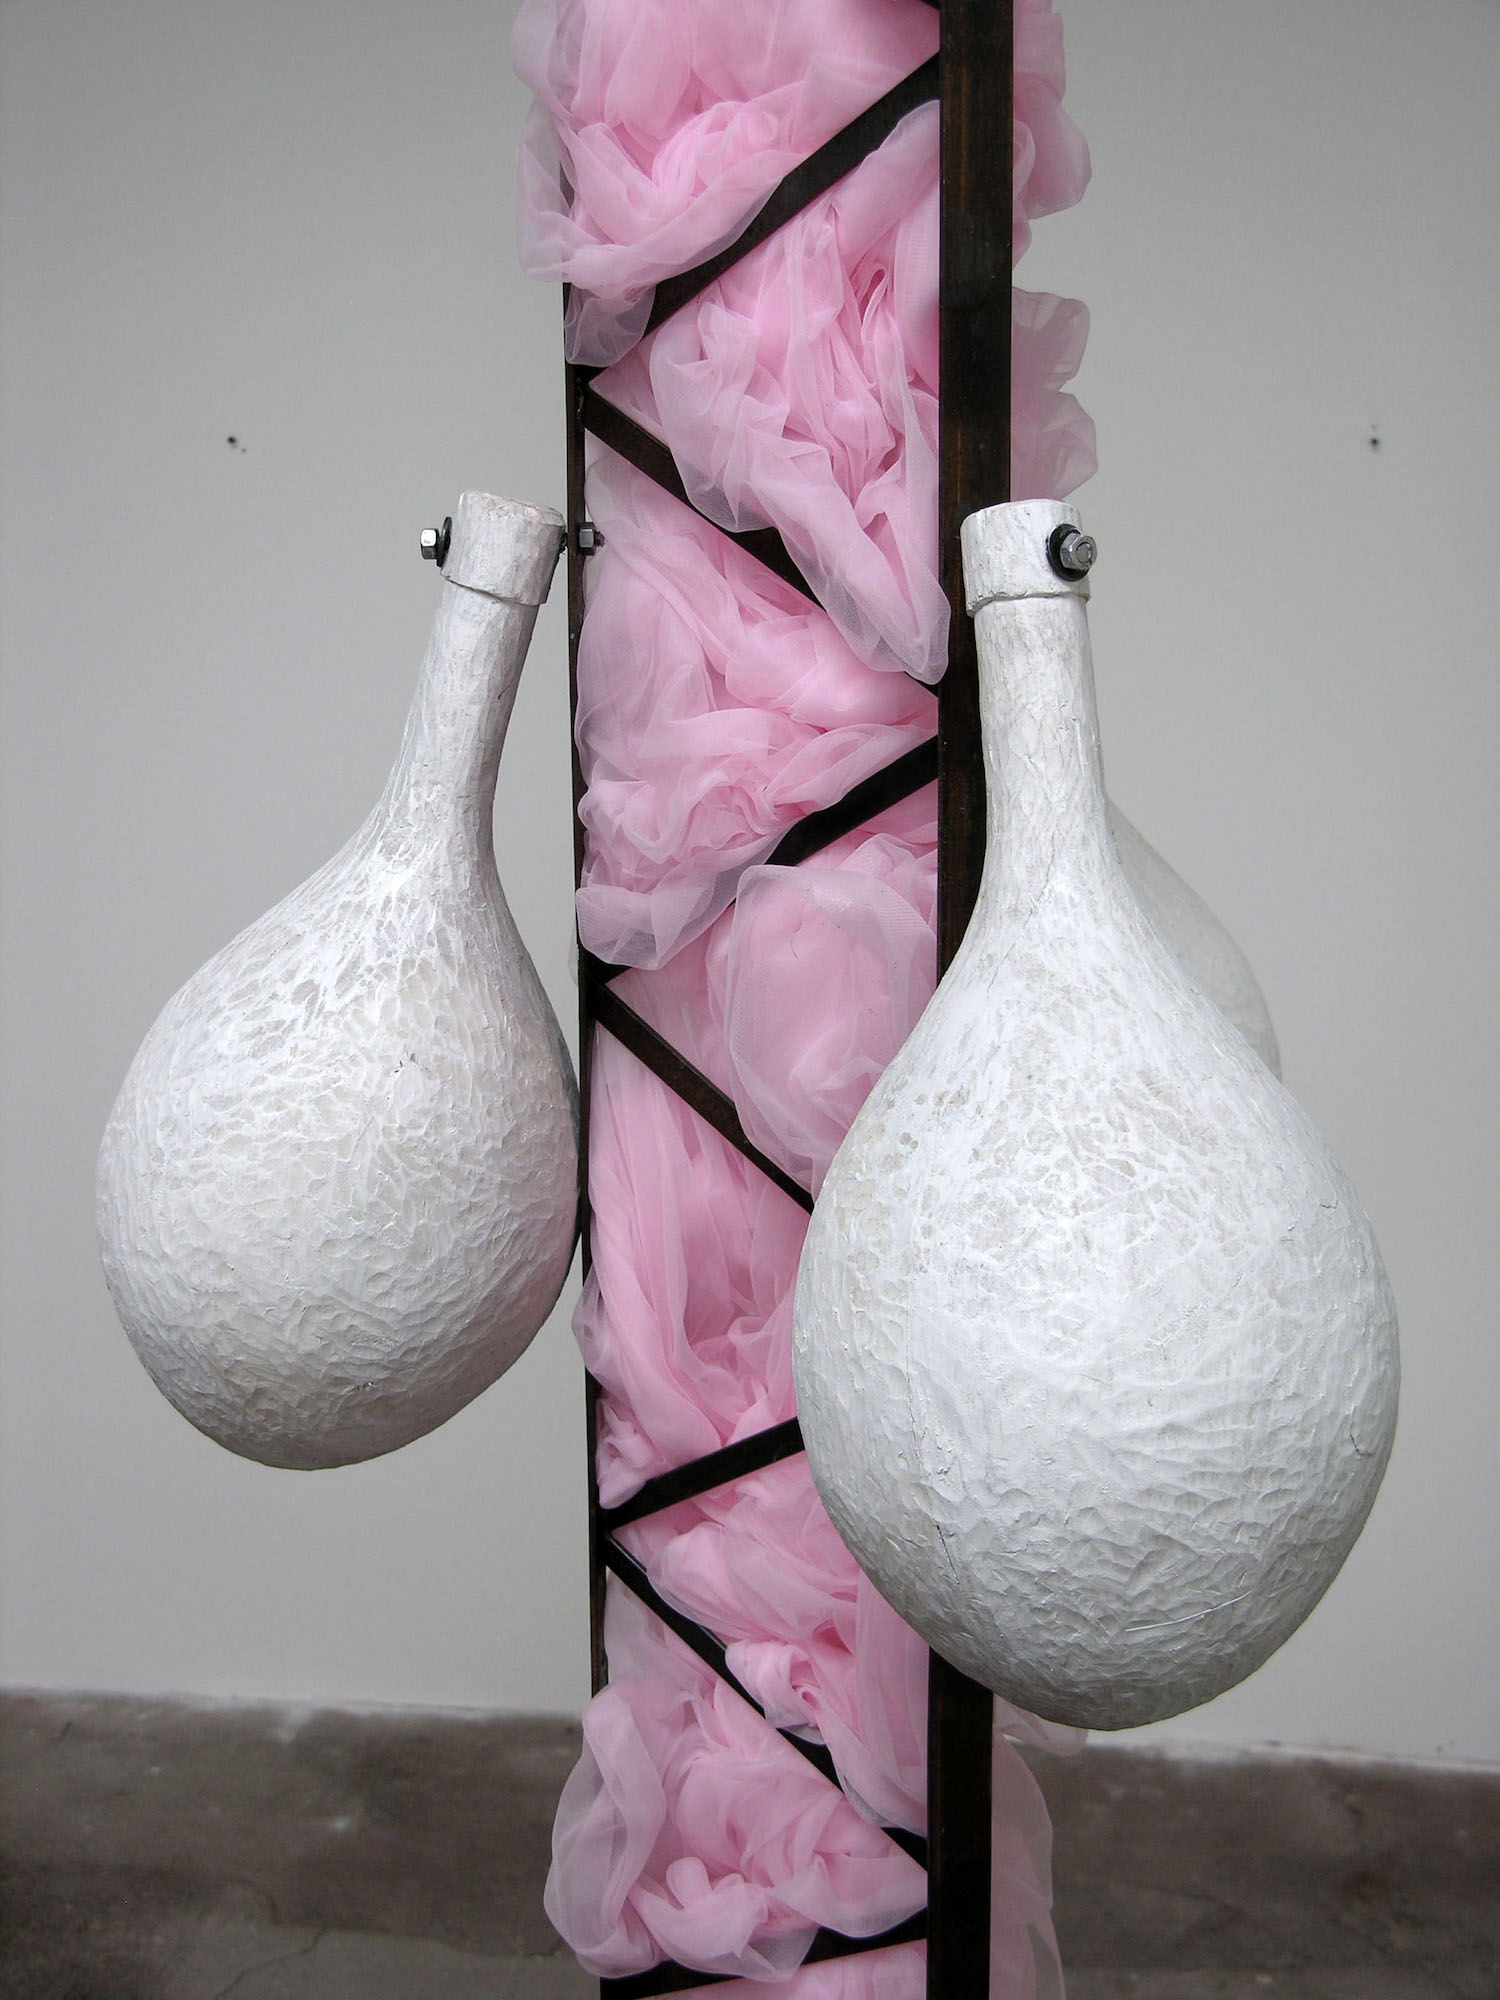  S Machine (2007), detail of the materials in use: pink tutu fabric stuffed into the steel with carved poplar painted white  The show rewards viewing from different angles—close scrutiny of the pieces’ materials and nuances of movement—and a consider